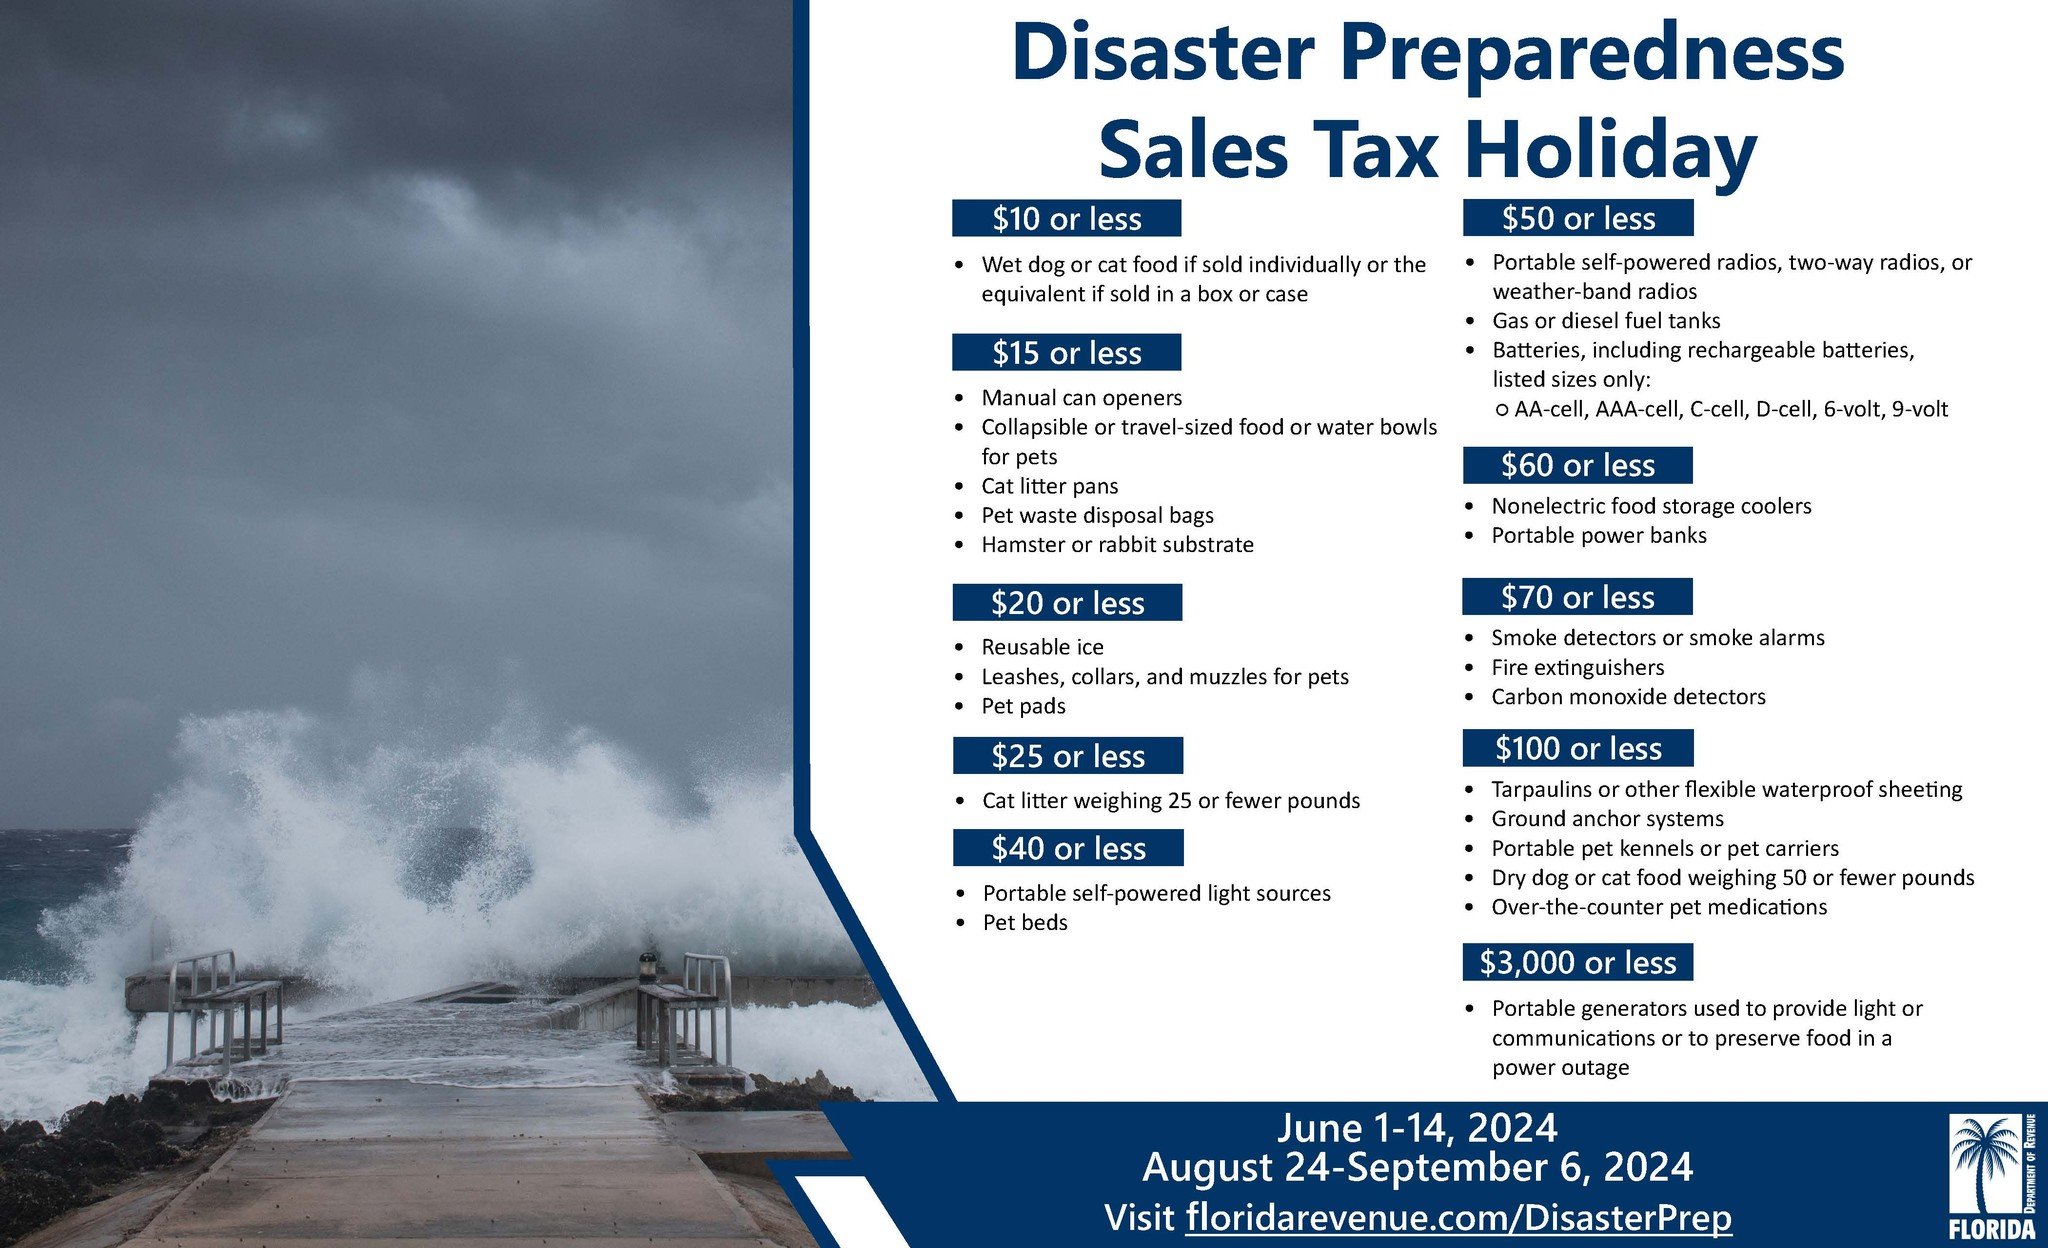 Florida&rsquo;s first 2024 Disaster Preparedness Sales Tax Holiday begins on Saturday, June 1, 2024, and ends on Friday, June 14, 2024.

A second Disaster Preparedness Holiday begins on Saturday, August 24, 2024, and ends on Friday, September 6, 2024